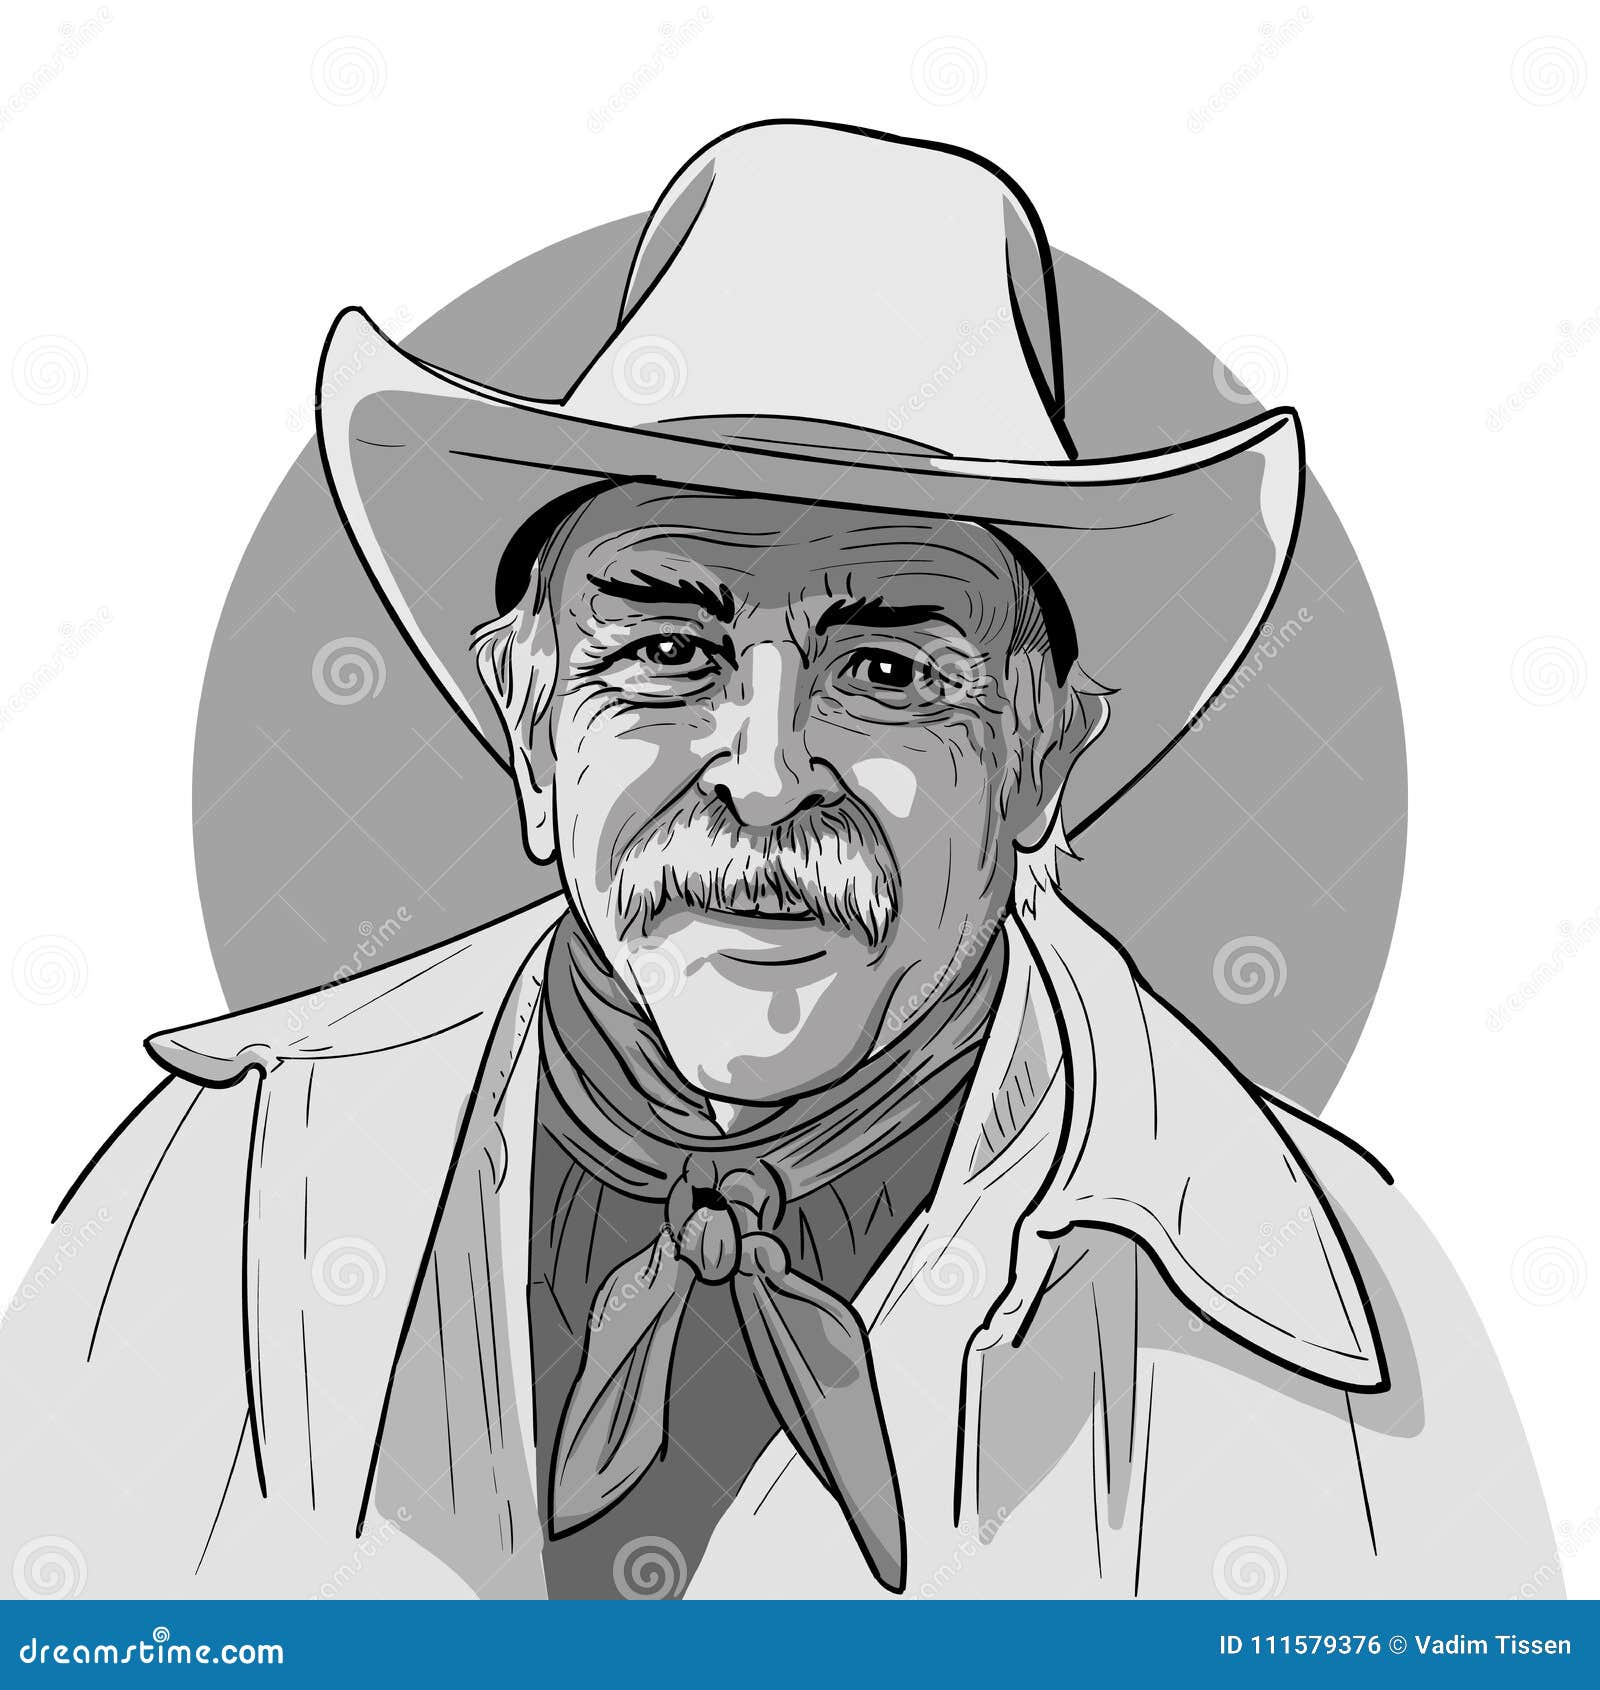 Classic Old Western Style Cowboy with Hat and Bandana. Cartoon Sketch